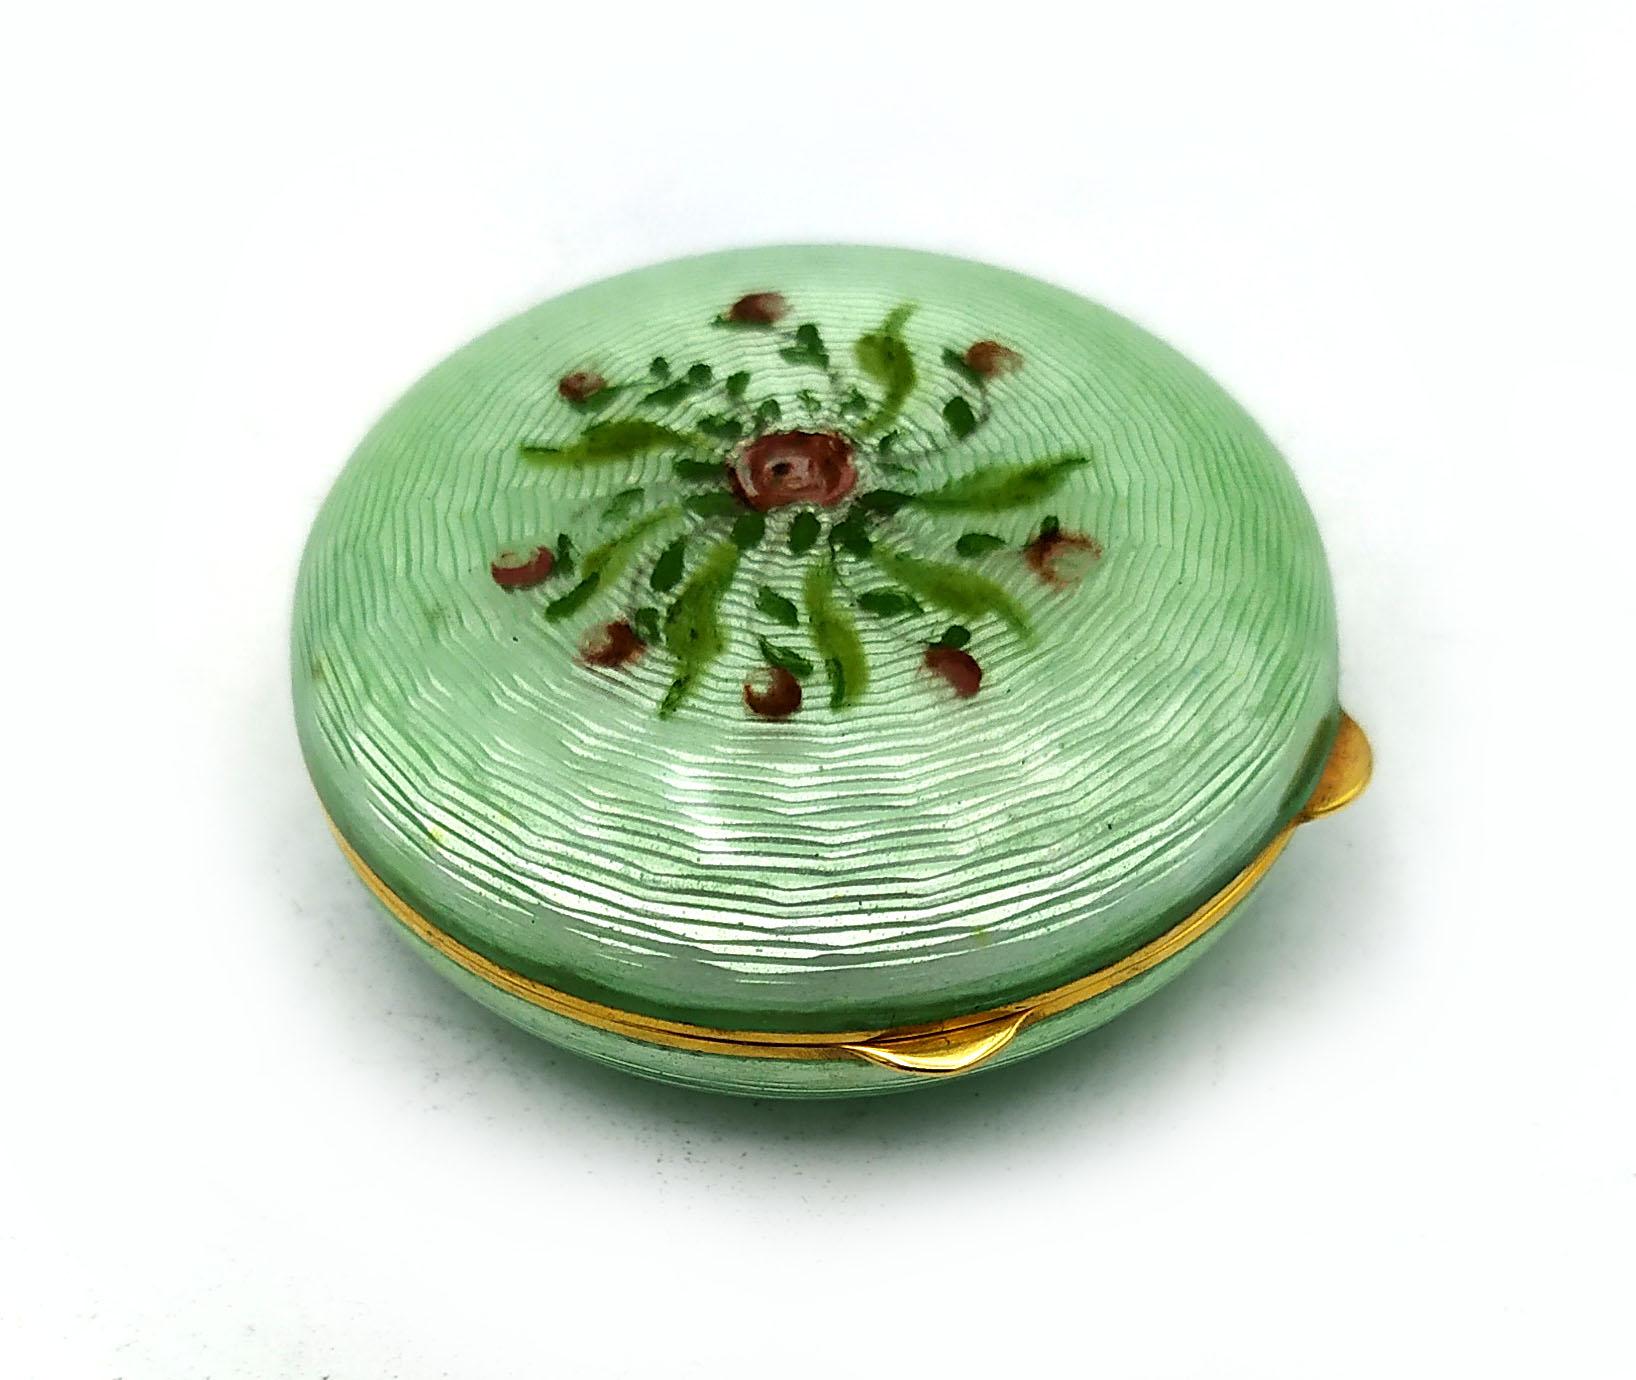 Round domed pill box in 925/1000 sterling silver gold plated with translucent enamel fired on guilloche above and below, and hand-painted floral miniature. Viennese Art Nouveau style, second half of the 19th century. Measurement diameter cm. 4.2 cm